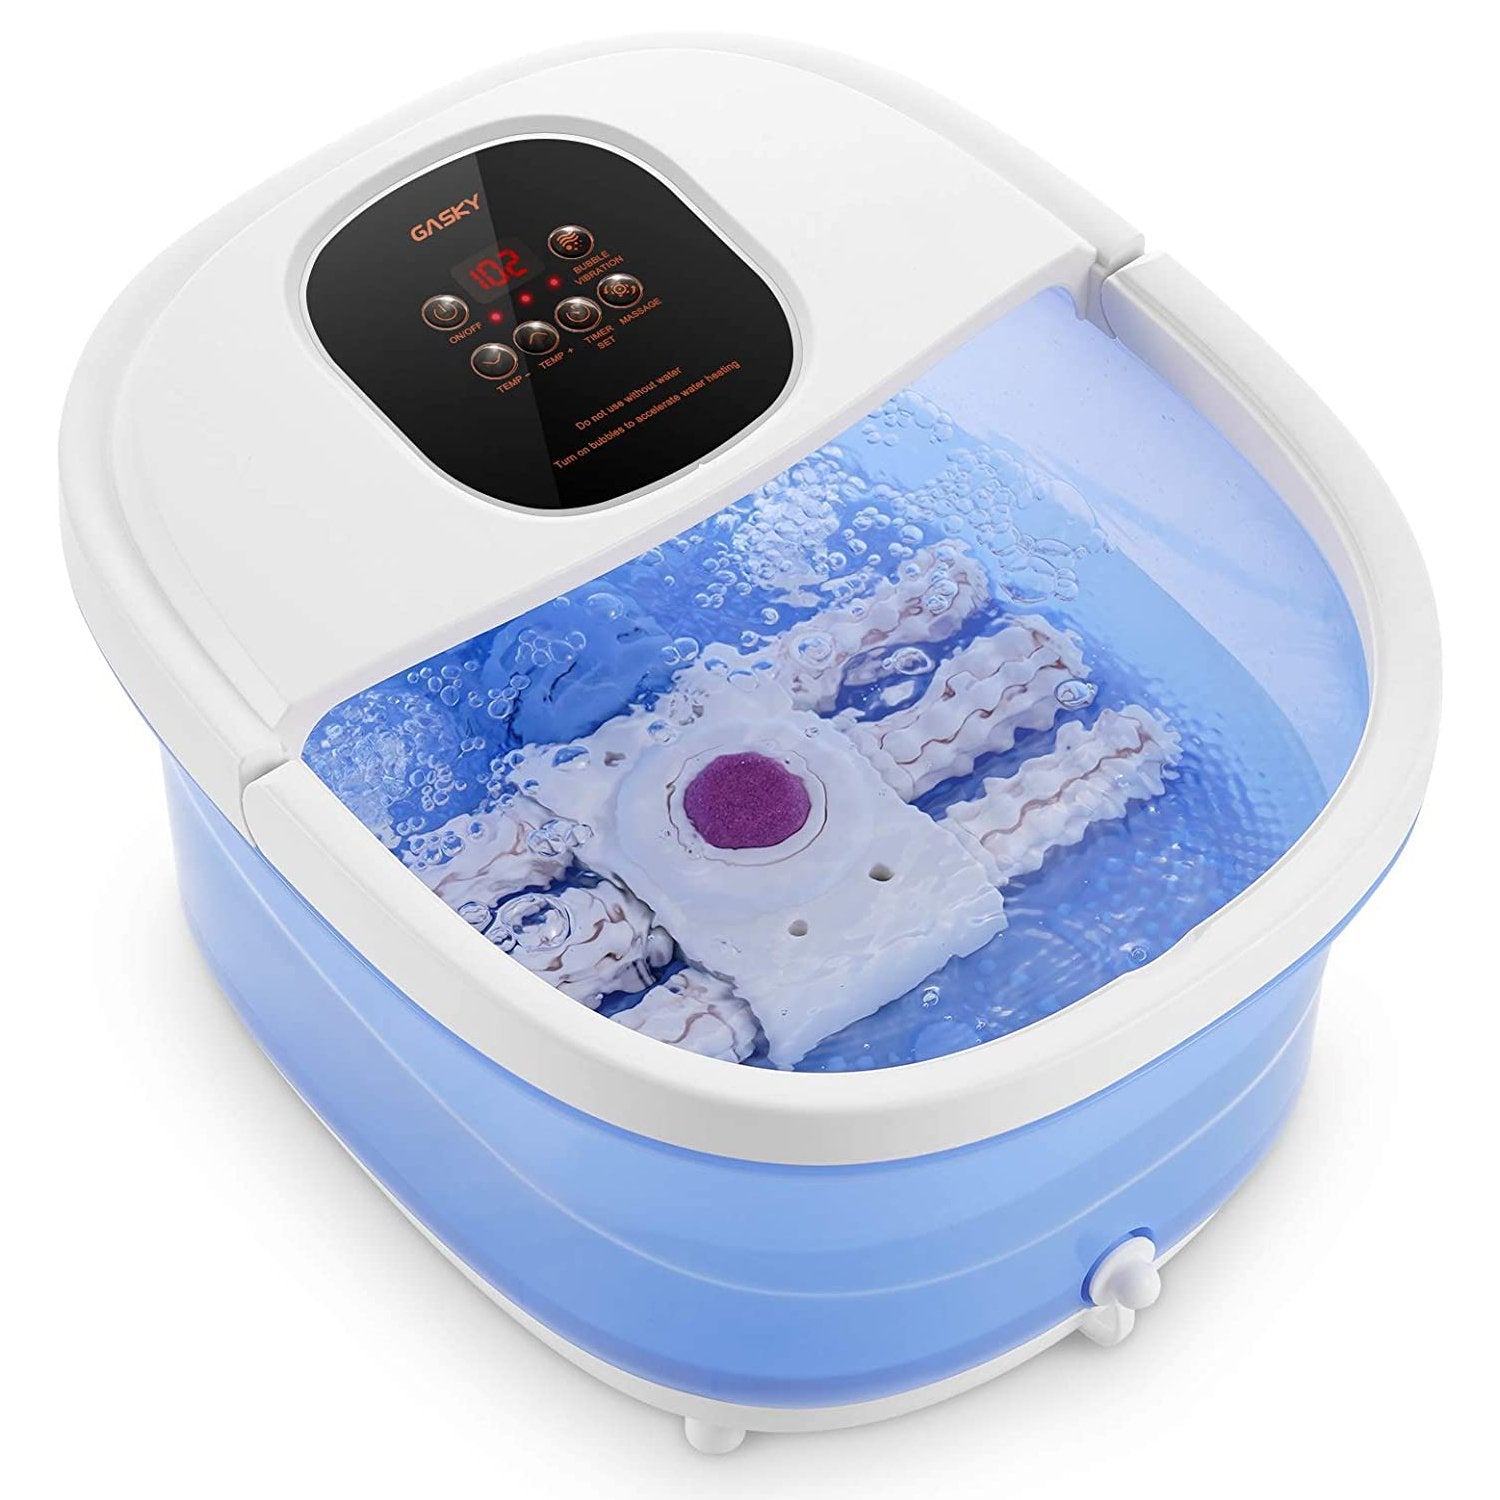 Load image into Gallery viewer, Foot Spa/Bath Massager 6 in 1-Heat, Bubbles, Vibration, 6 Motorized Shiatsu Rollers, Frequency Conversion, Time &amp; Temprature Settings, Pedicure Tub Bath for Feet Home Use - NAIPO
